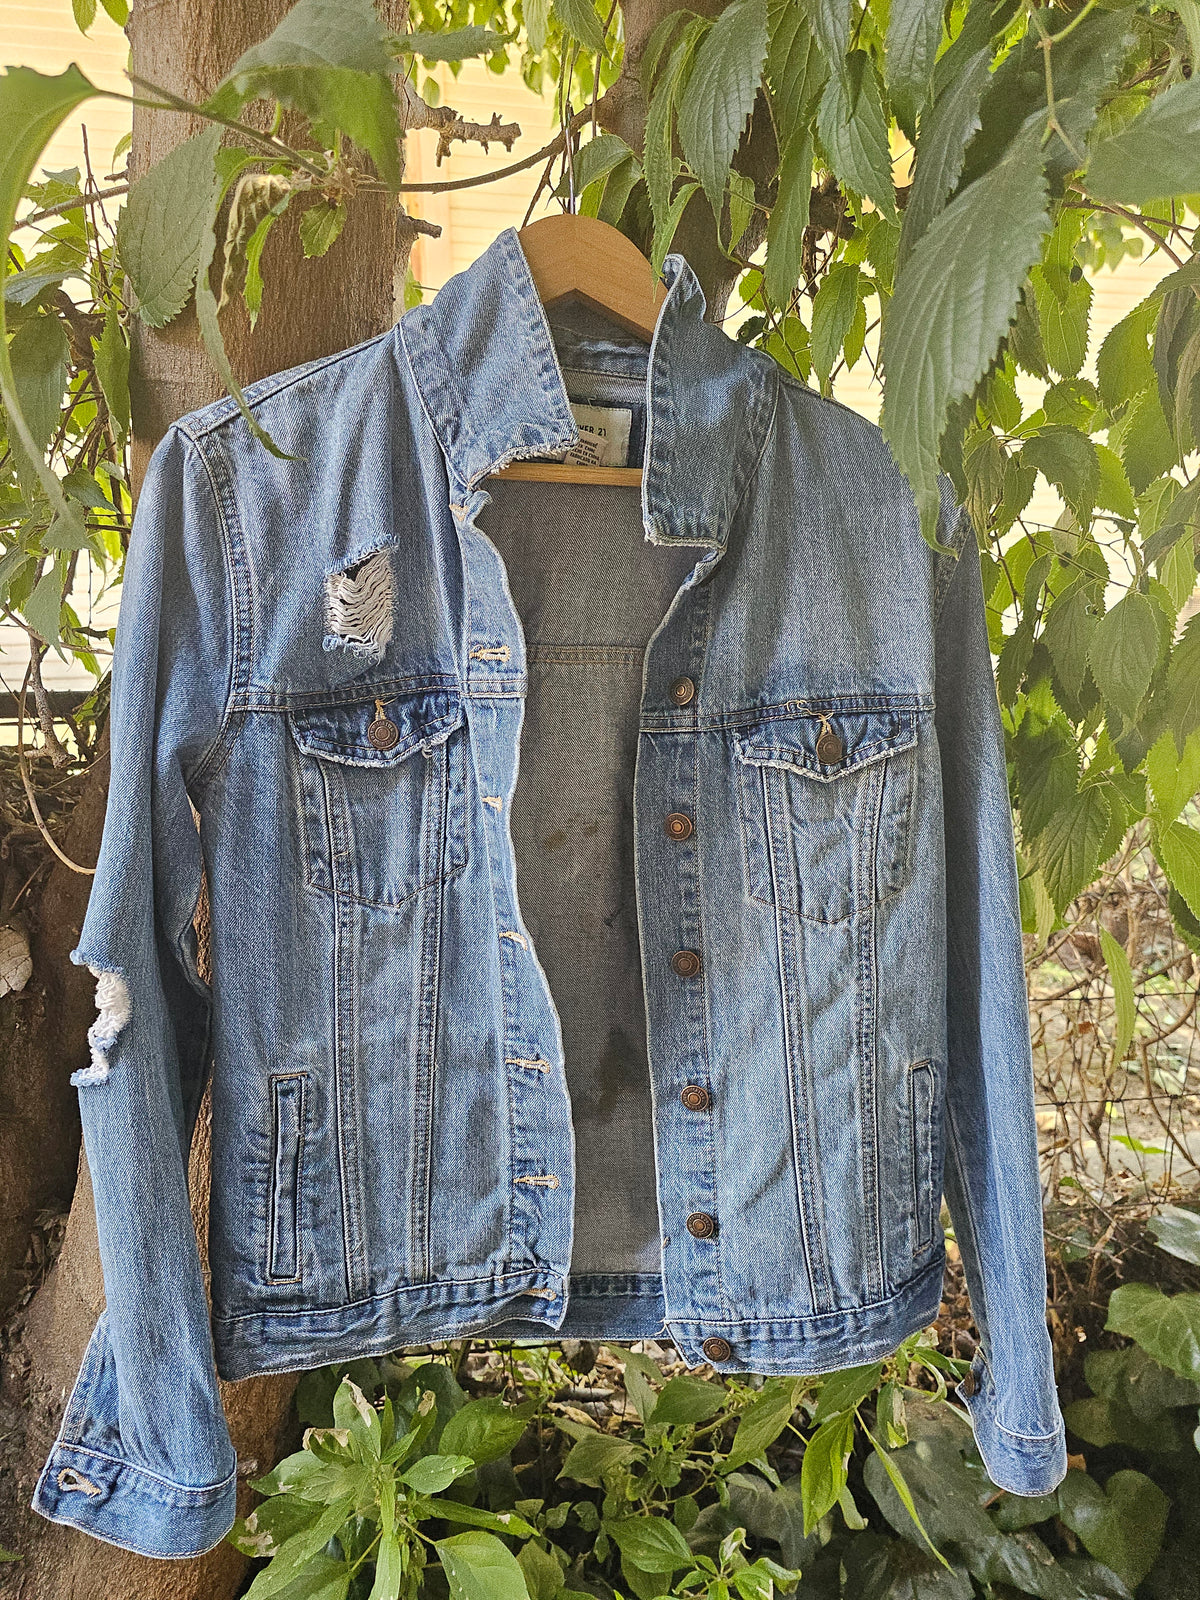 SOLD - Brandi Jae Collab Jean Jacket feat a Baby Cow with Tag